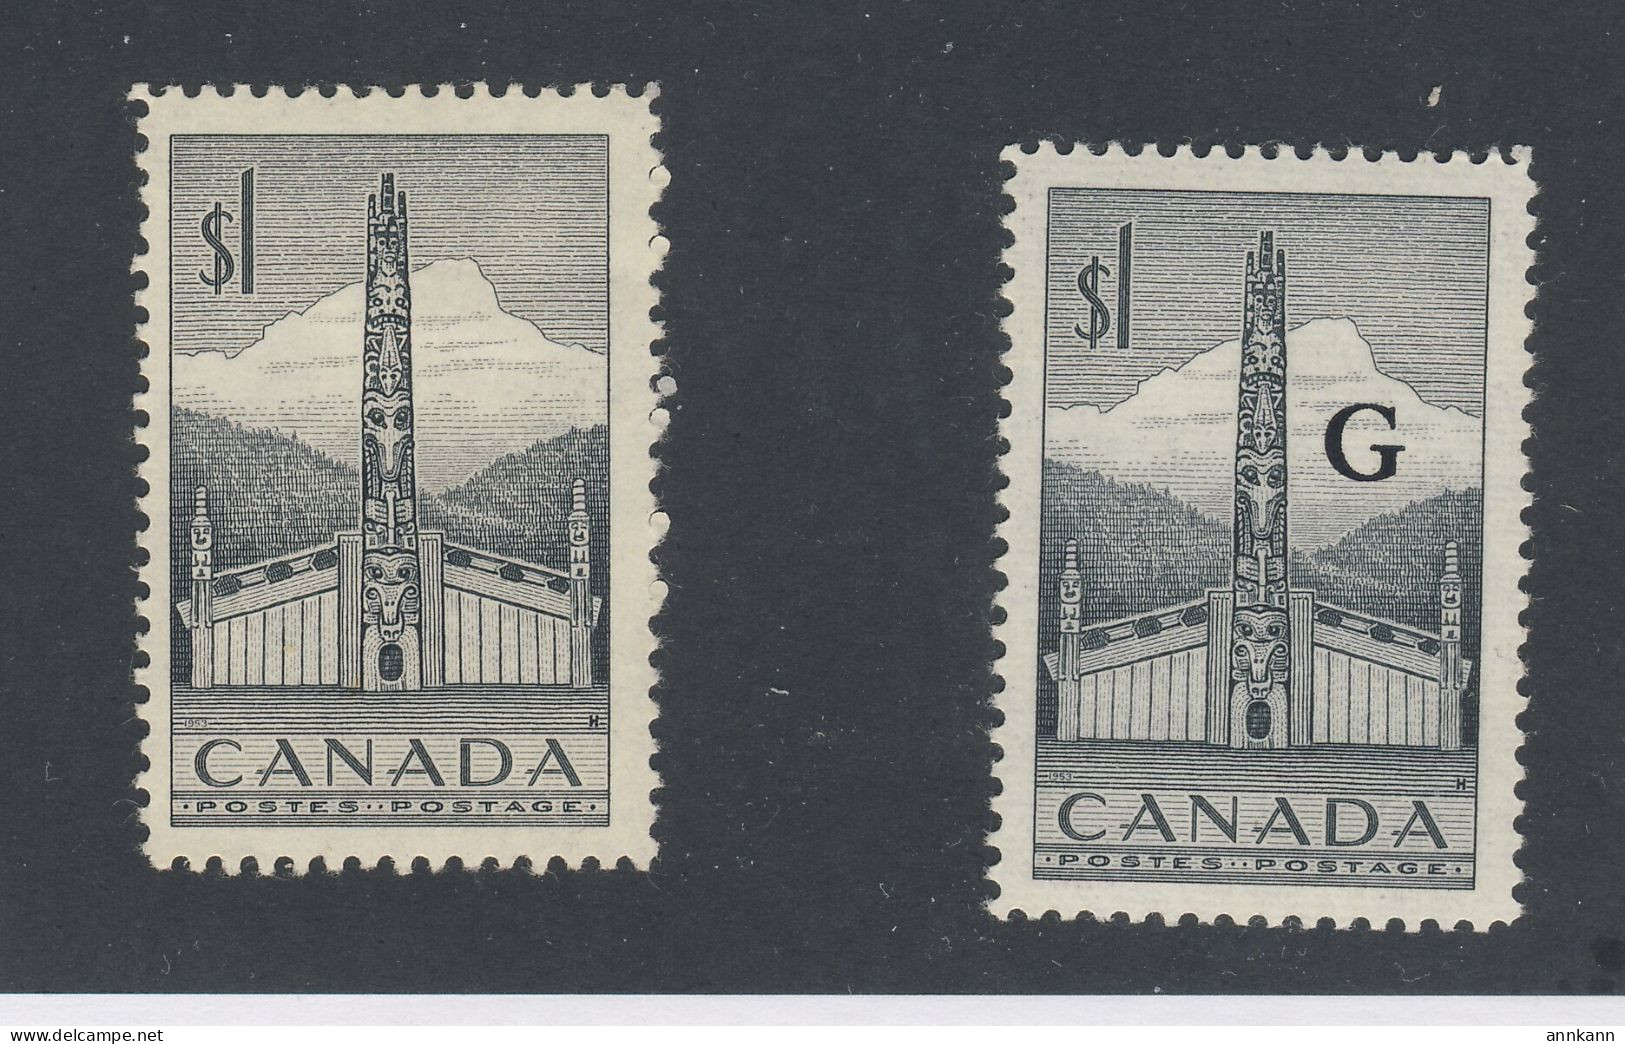 2x Canada MH Stamps #321 -$1.00 Totem & #032 -$1.00 Totem "G" GV = $17.00 - Overprinted